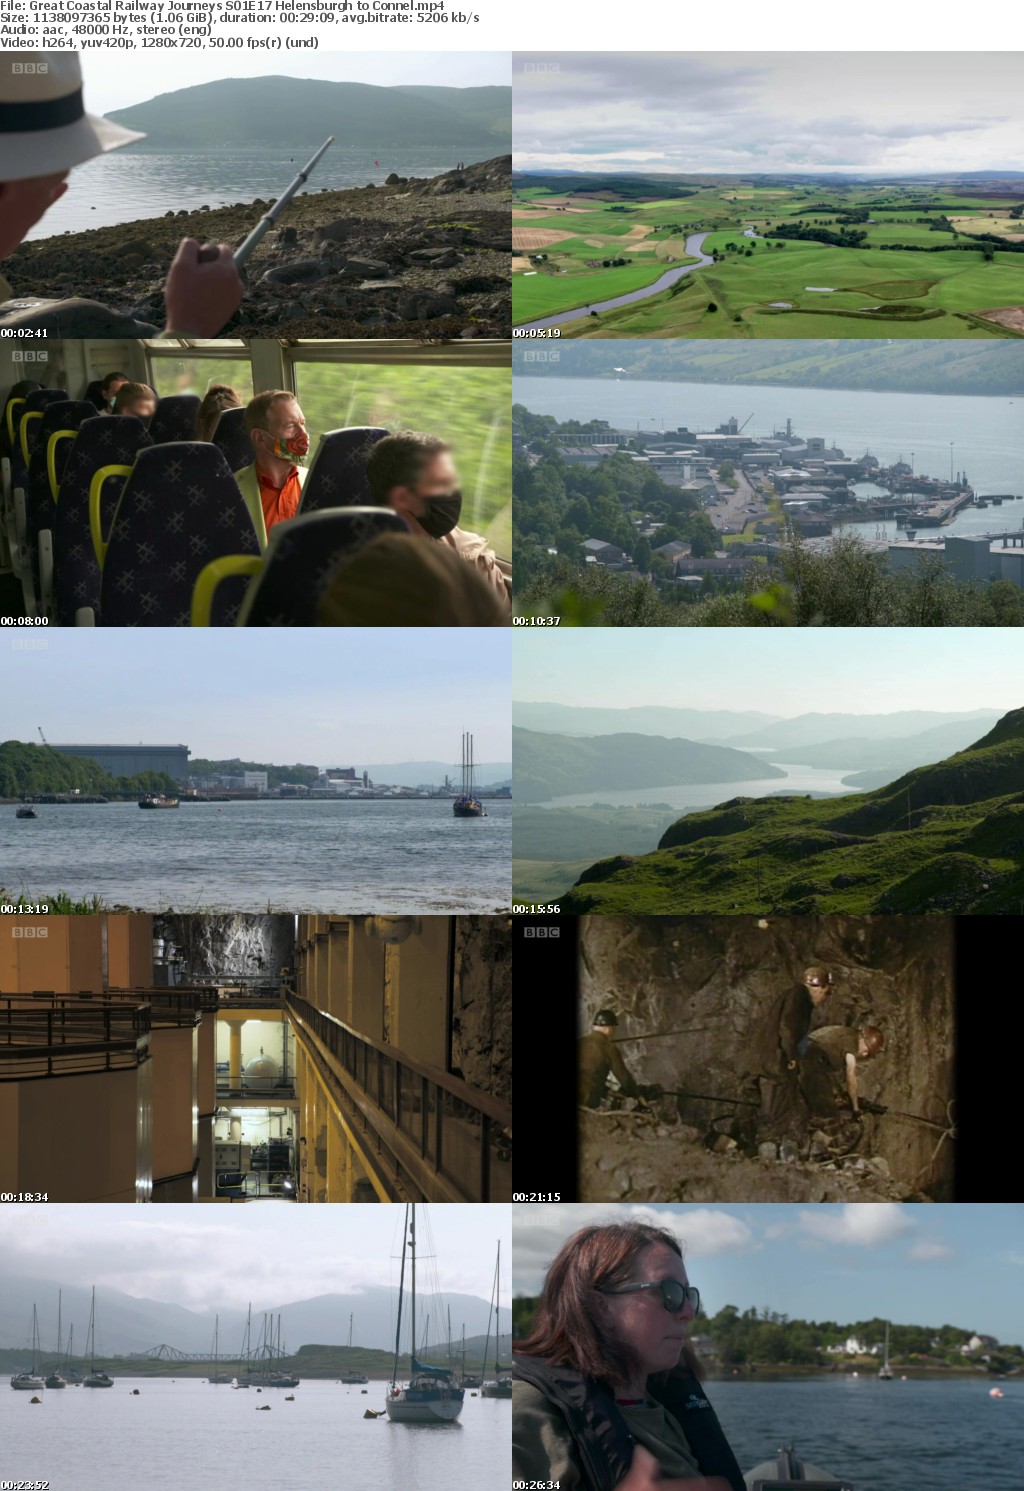 Great Coastal Railway Journeys S01E17 Helensburgh to Connel